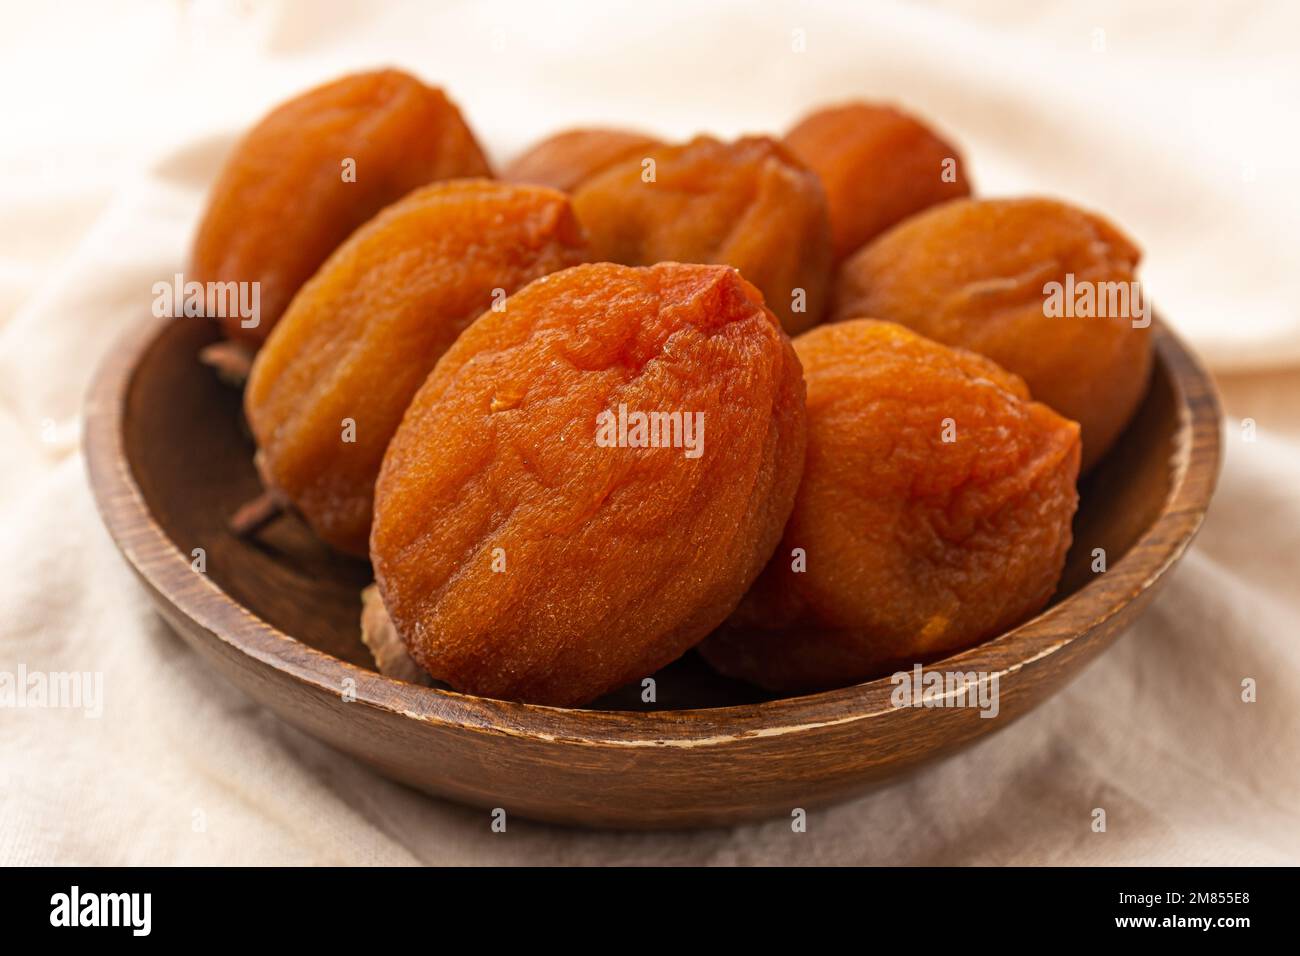 Korean food culture. fruit dry food. sweet and chewy food Stock Photo